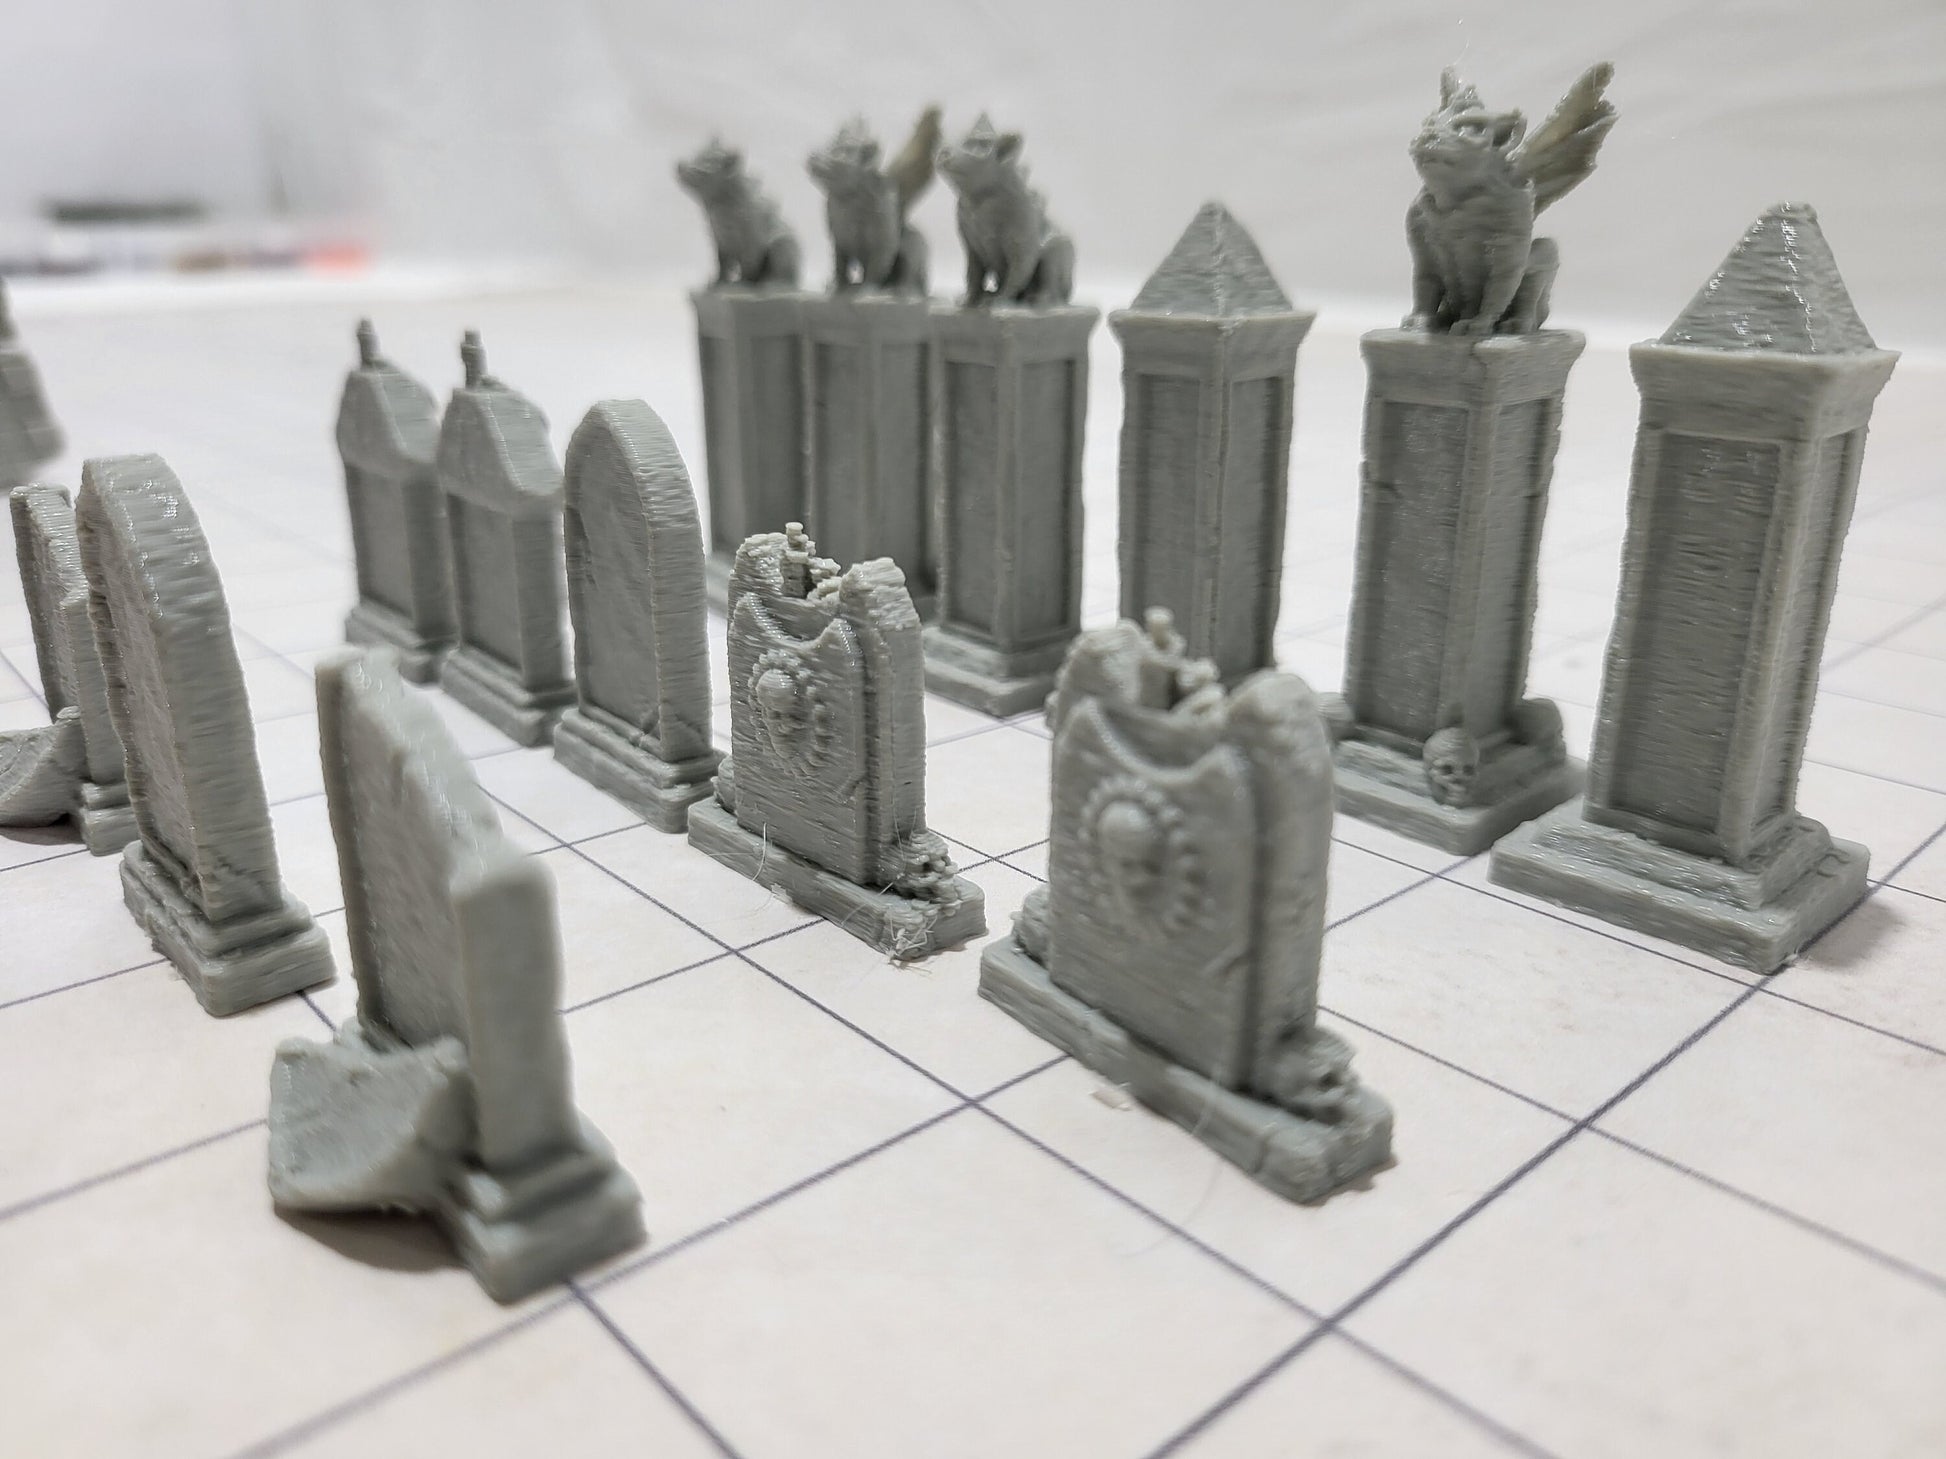 tombstone, cemetery, graveyard, tomb, death, halloween, all hallows eve, stones, headstones, gaming, dungeons and dragons, fantasy, scare